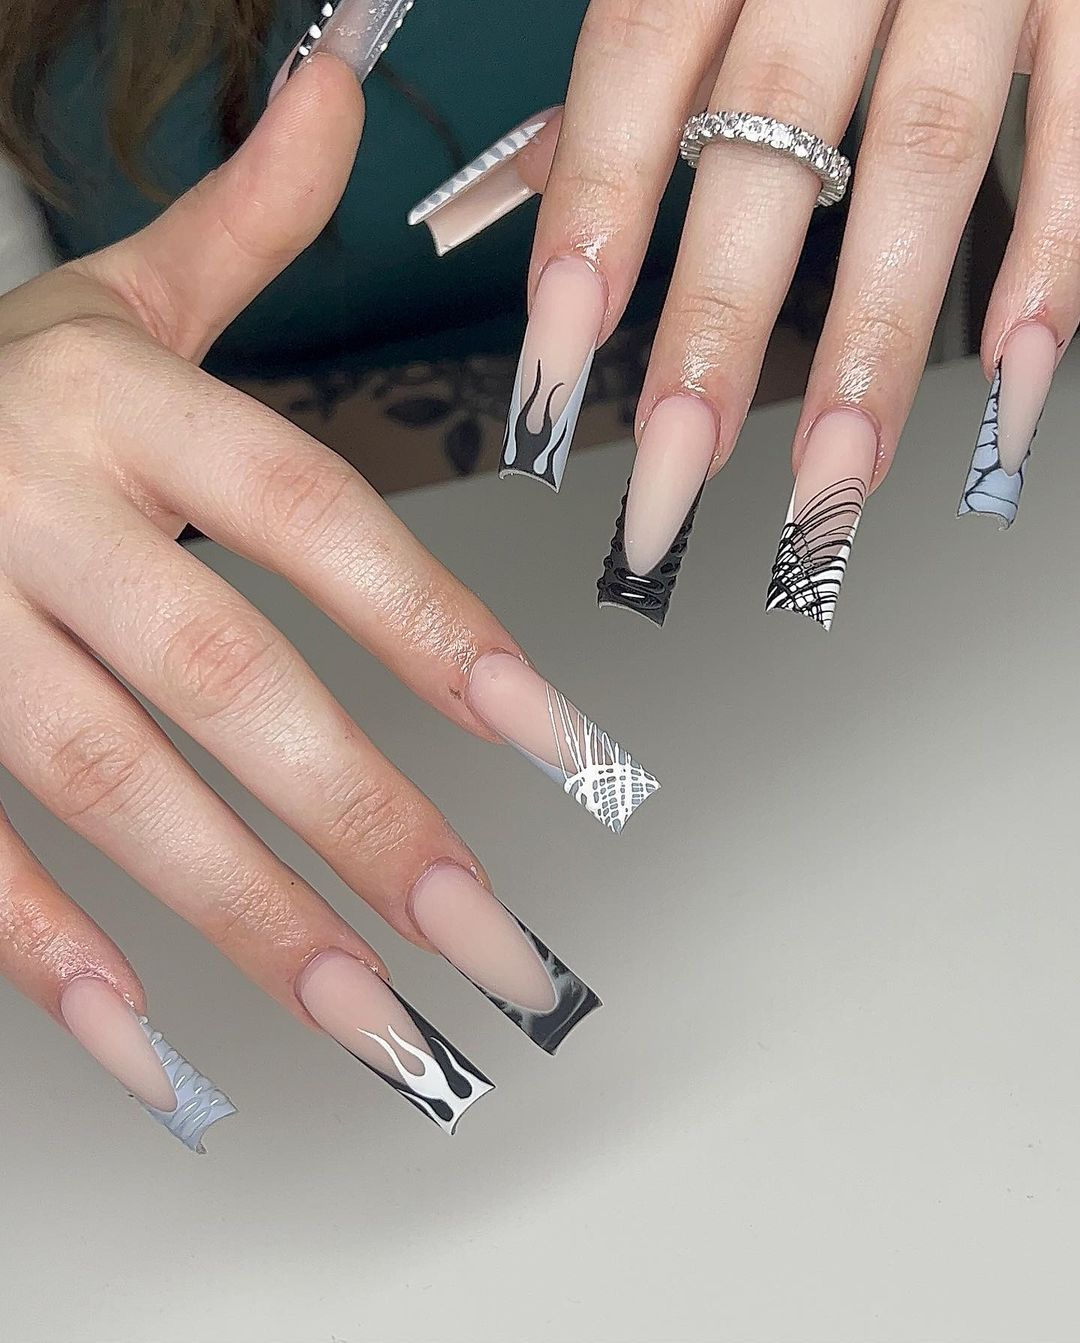 Black and White French Tip Coffin Nails